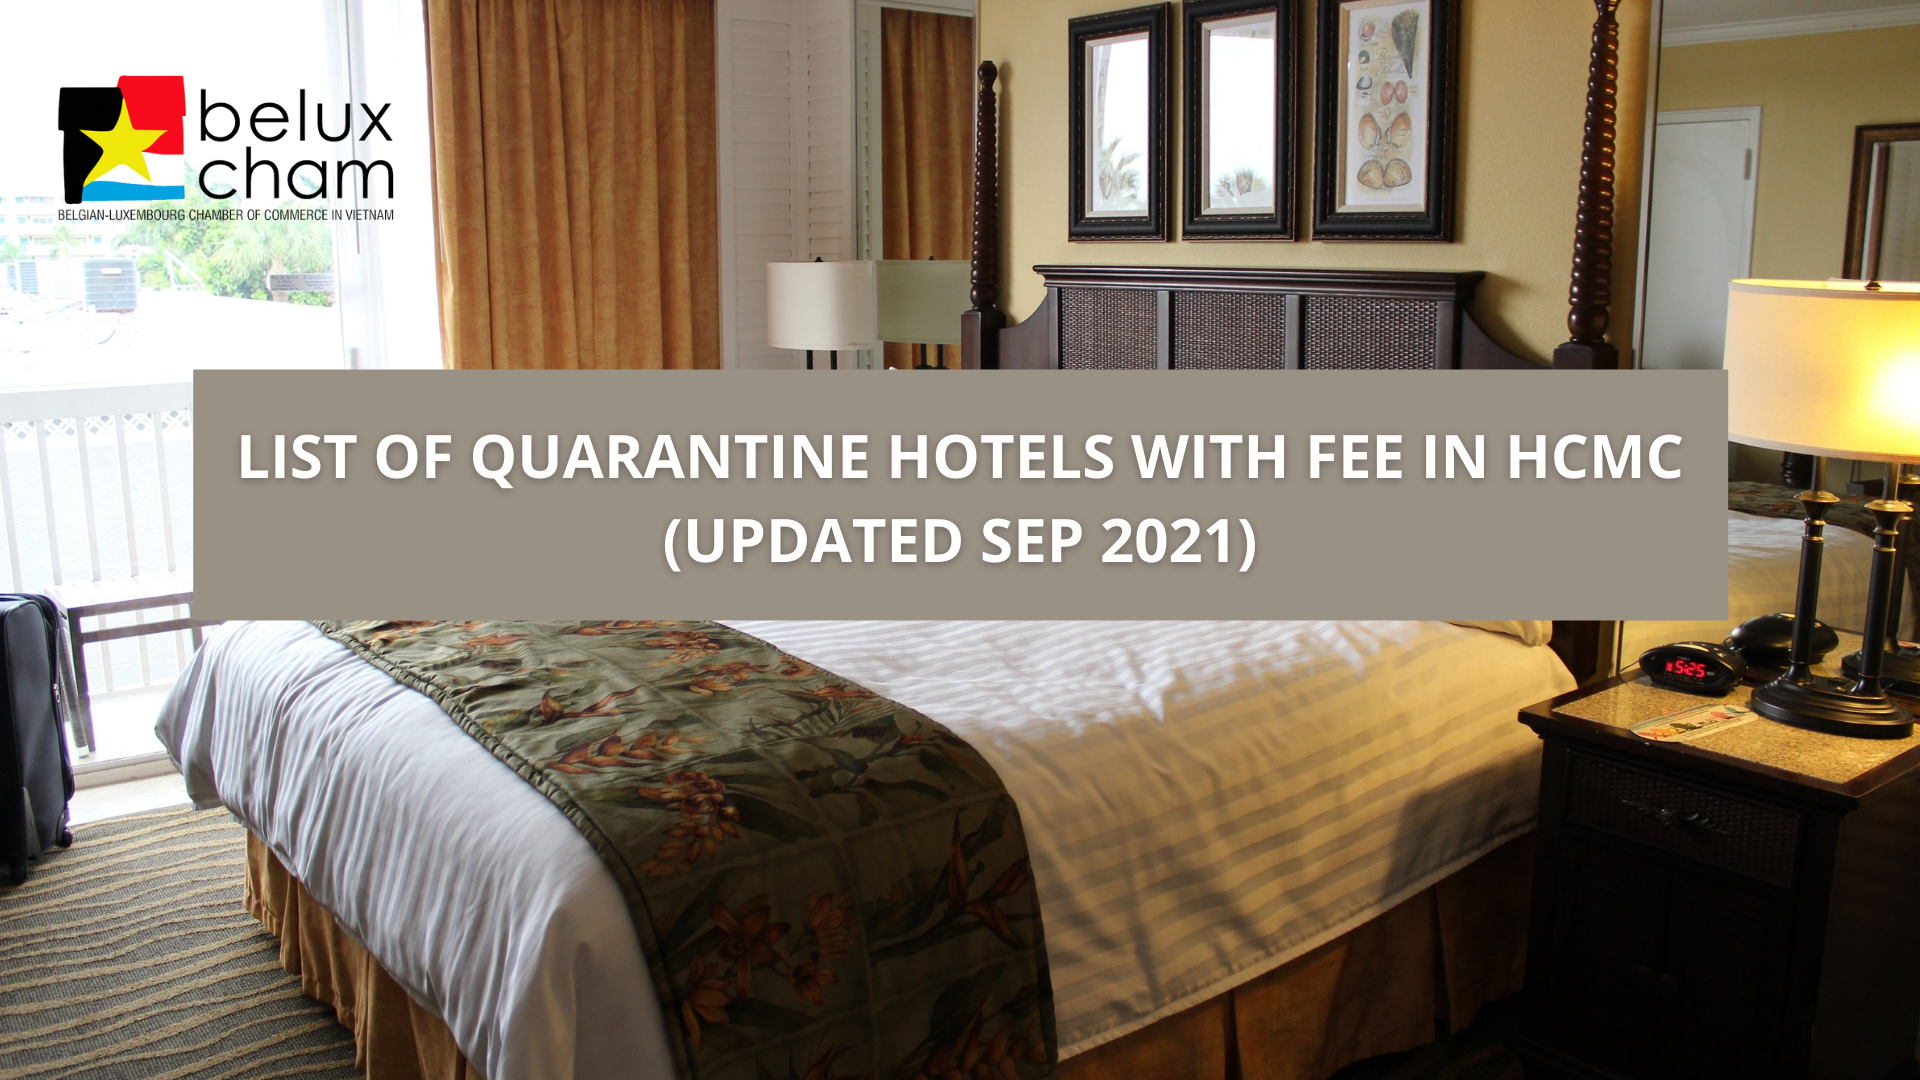 List of Quarantine hotels with fee in HCMC (Updated Sep 2021)